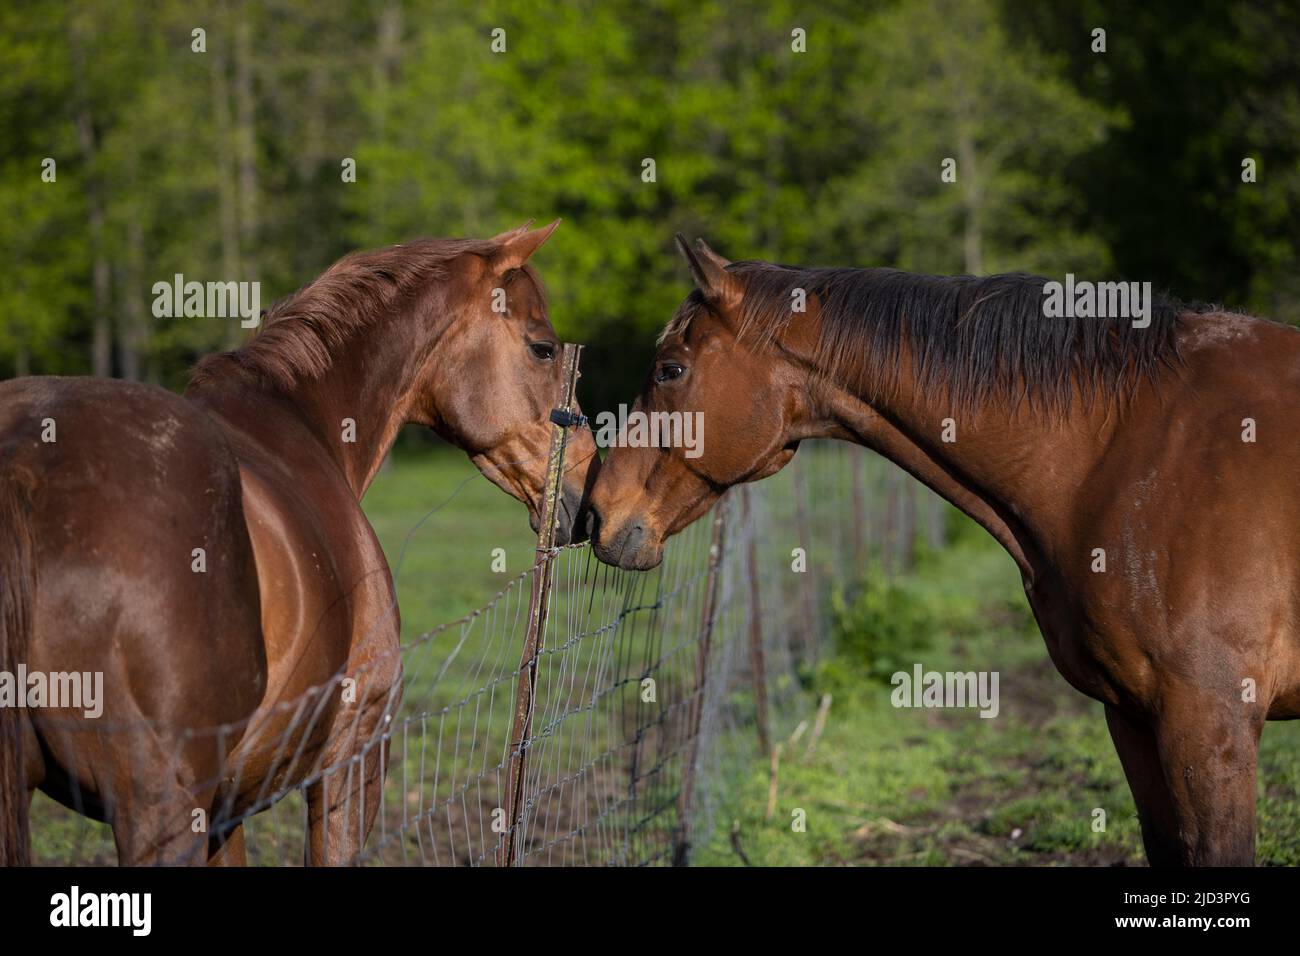 Two horses greeting each other over a fence. Stock Photo